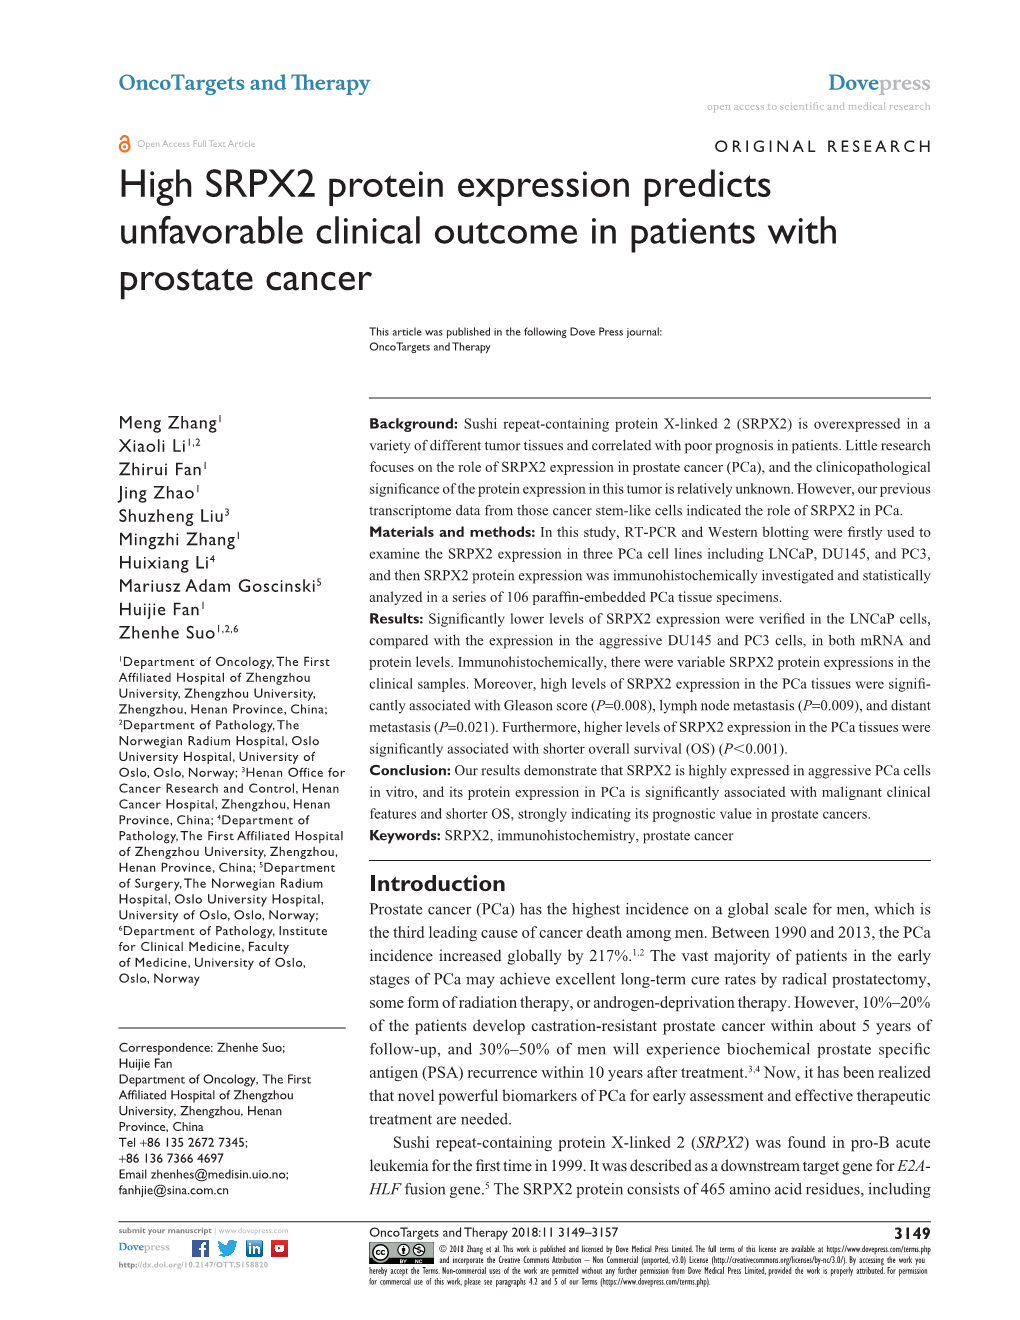 High SRPX2 Protein Expression Predicts Unfavorable Clinical Outcome in Patients with Prostate Cancer